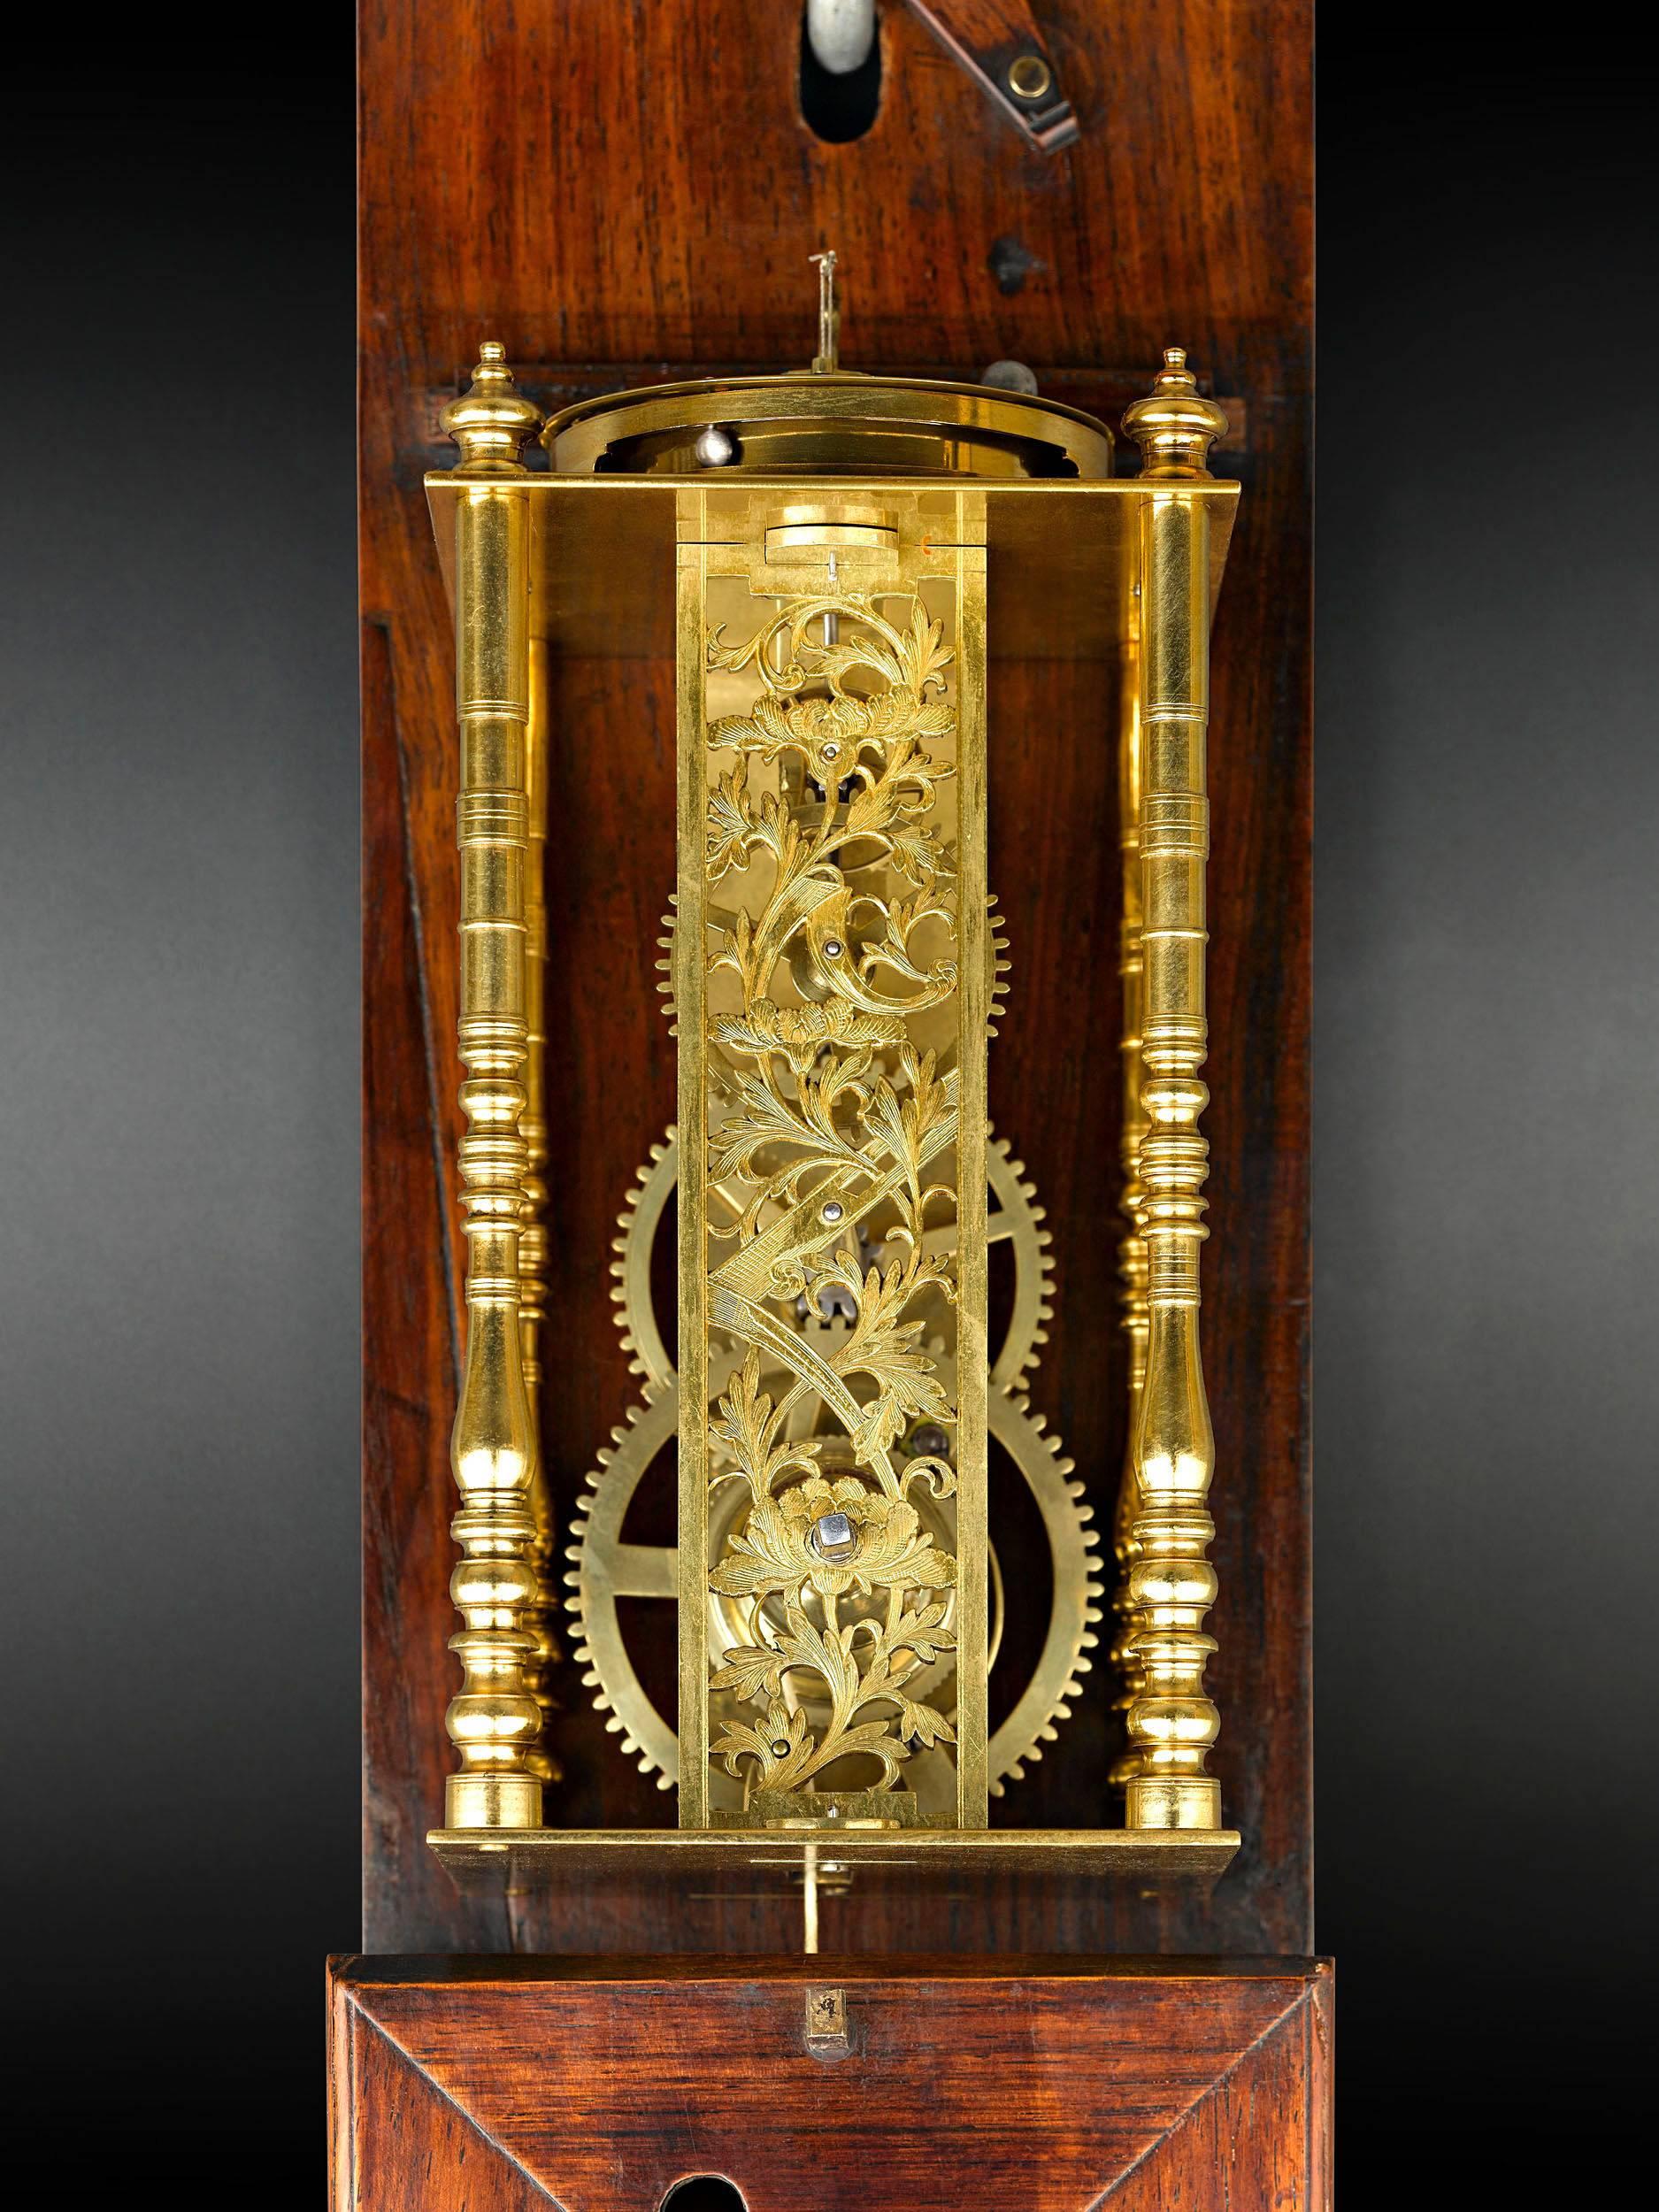 This exceptional, working Edo-period striking wall clock, or Shaku-Dokei, exemplifies the best of 19th century Japanese design. One of the largest Shitan clocks known, it measures time with a balance/verge movement, a type of movement which predated